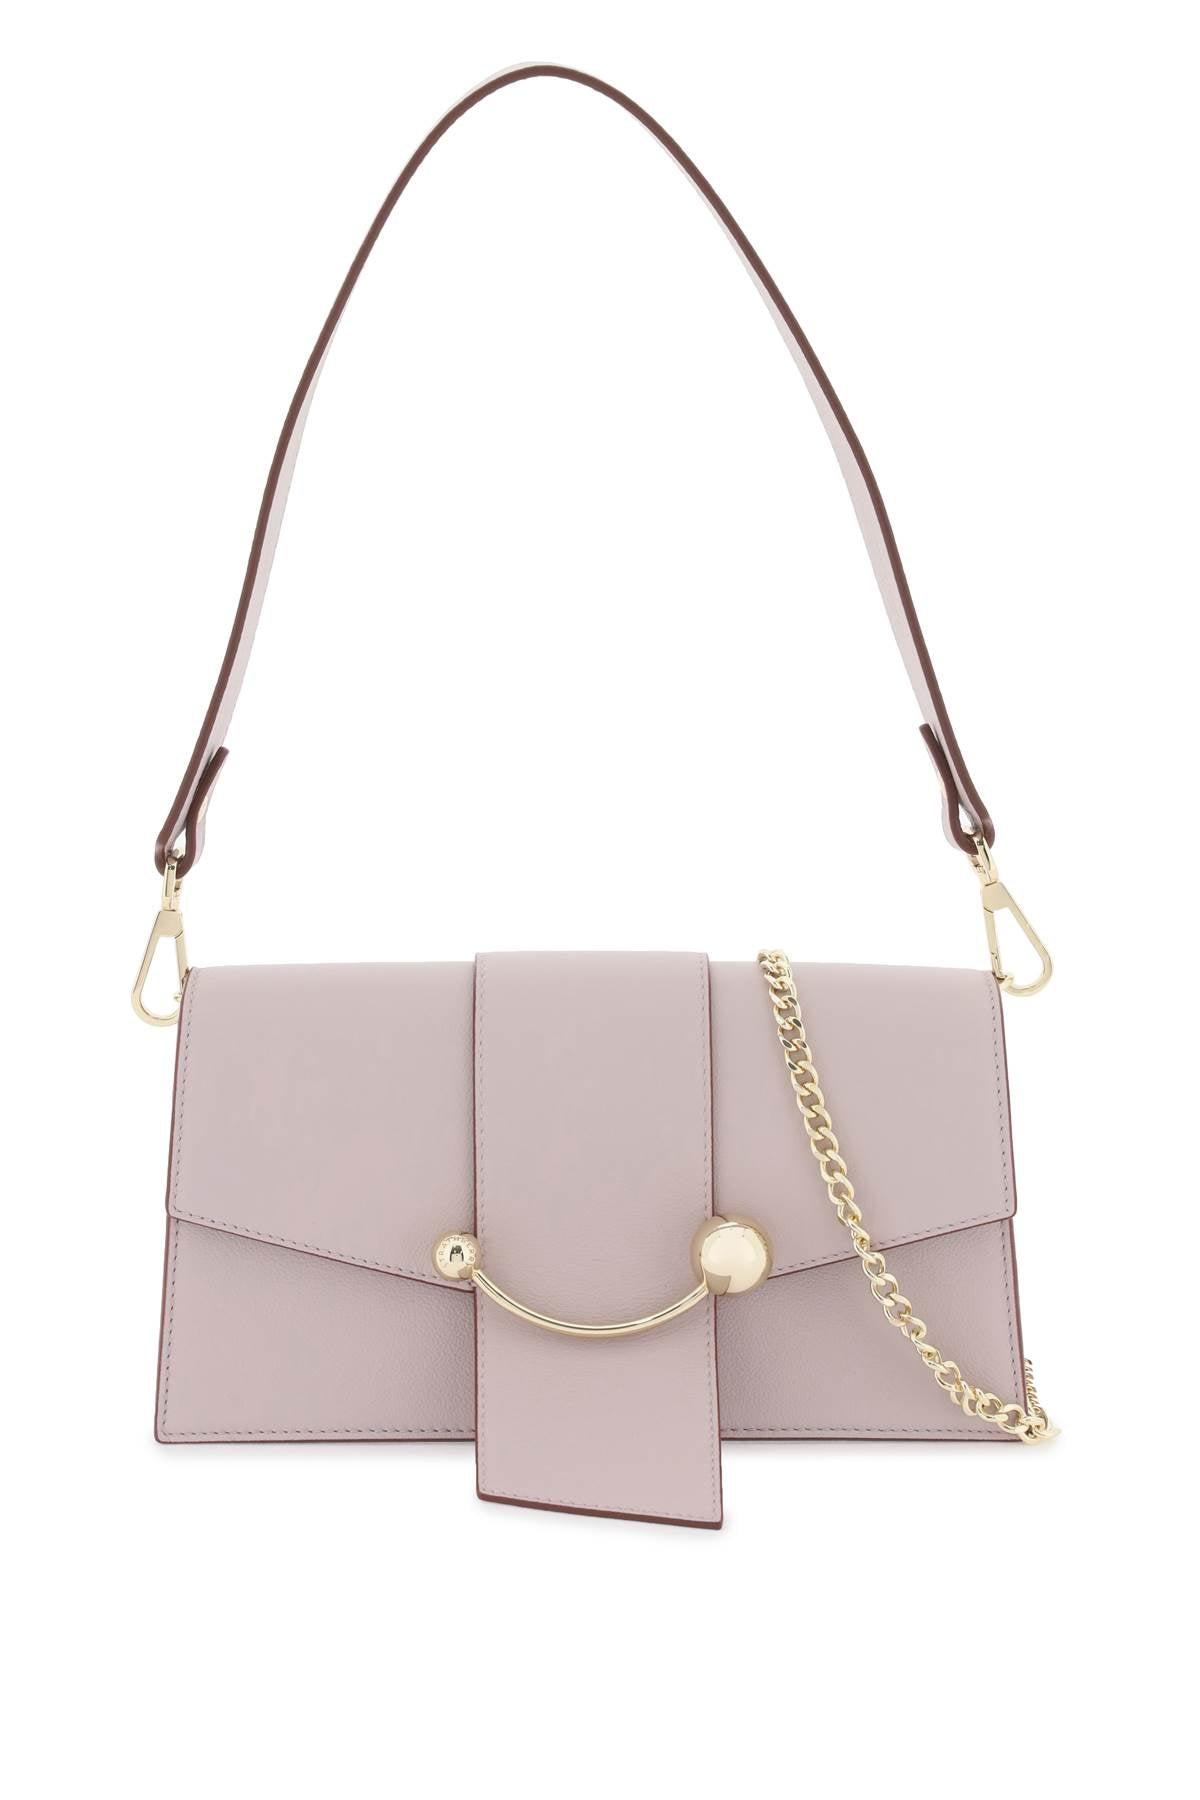 Strathberry 'mini Crescent' Bag in Pink | Lyst